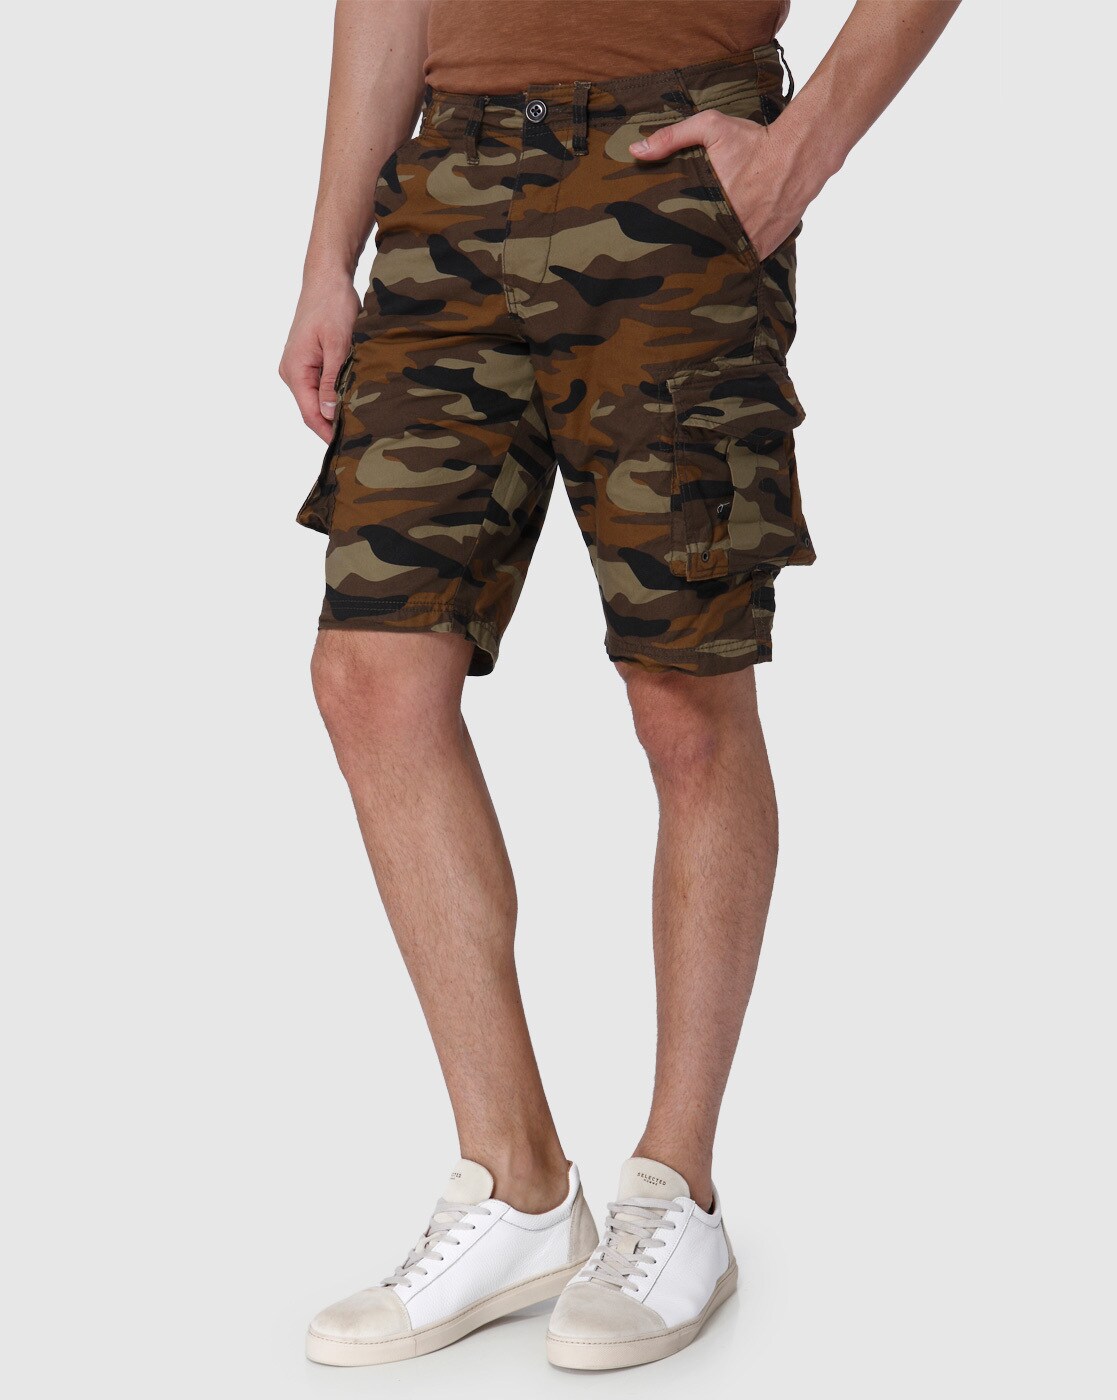 Army Pants and Cargo Pants Men Cyberpunk Pants Rave Outfit Climbing Pants  Short Pant Olive - Etsy